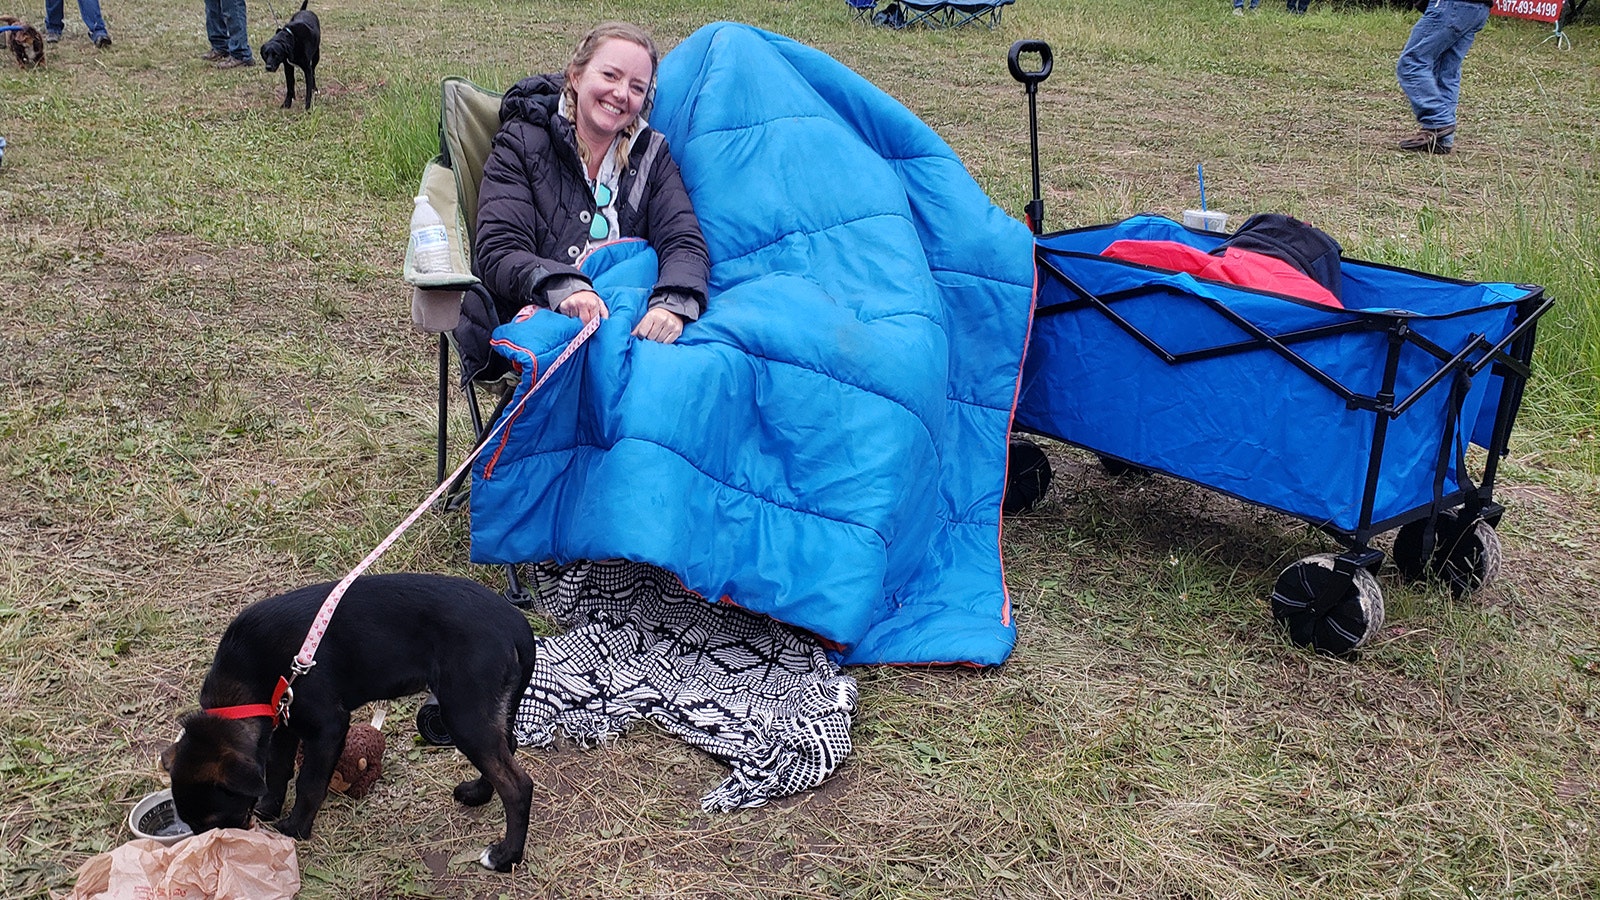 Christy Johnston and pet Zoey under a sleeping bag. Her boyfriend, Anthony Palato, is hiding underneath the sleeping bag because at the time it was cold enough to see one's breath.